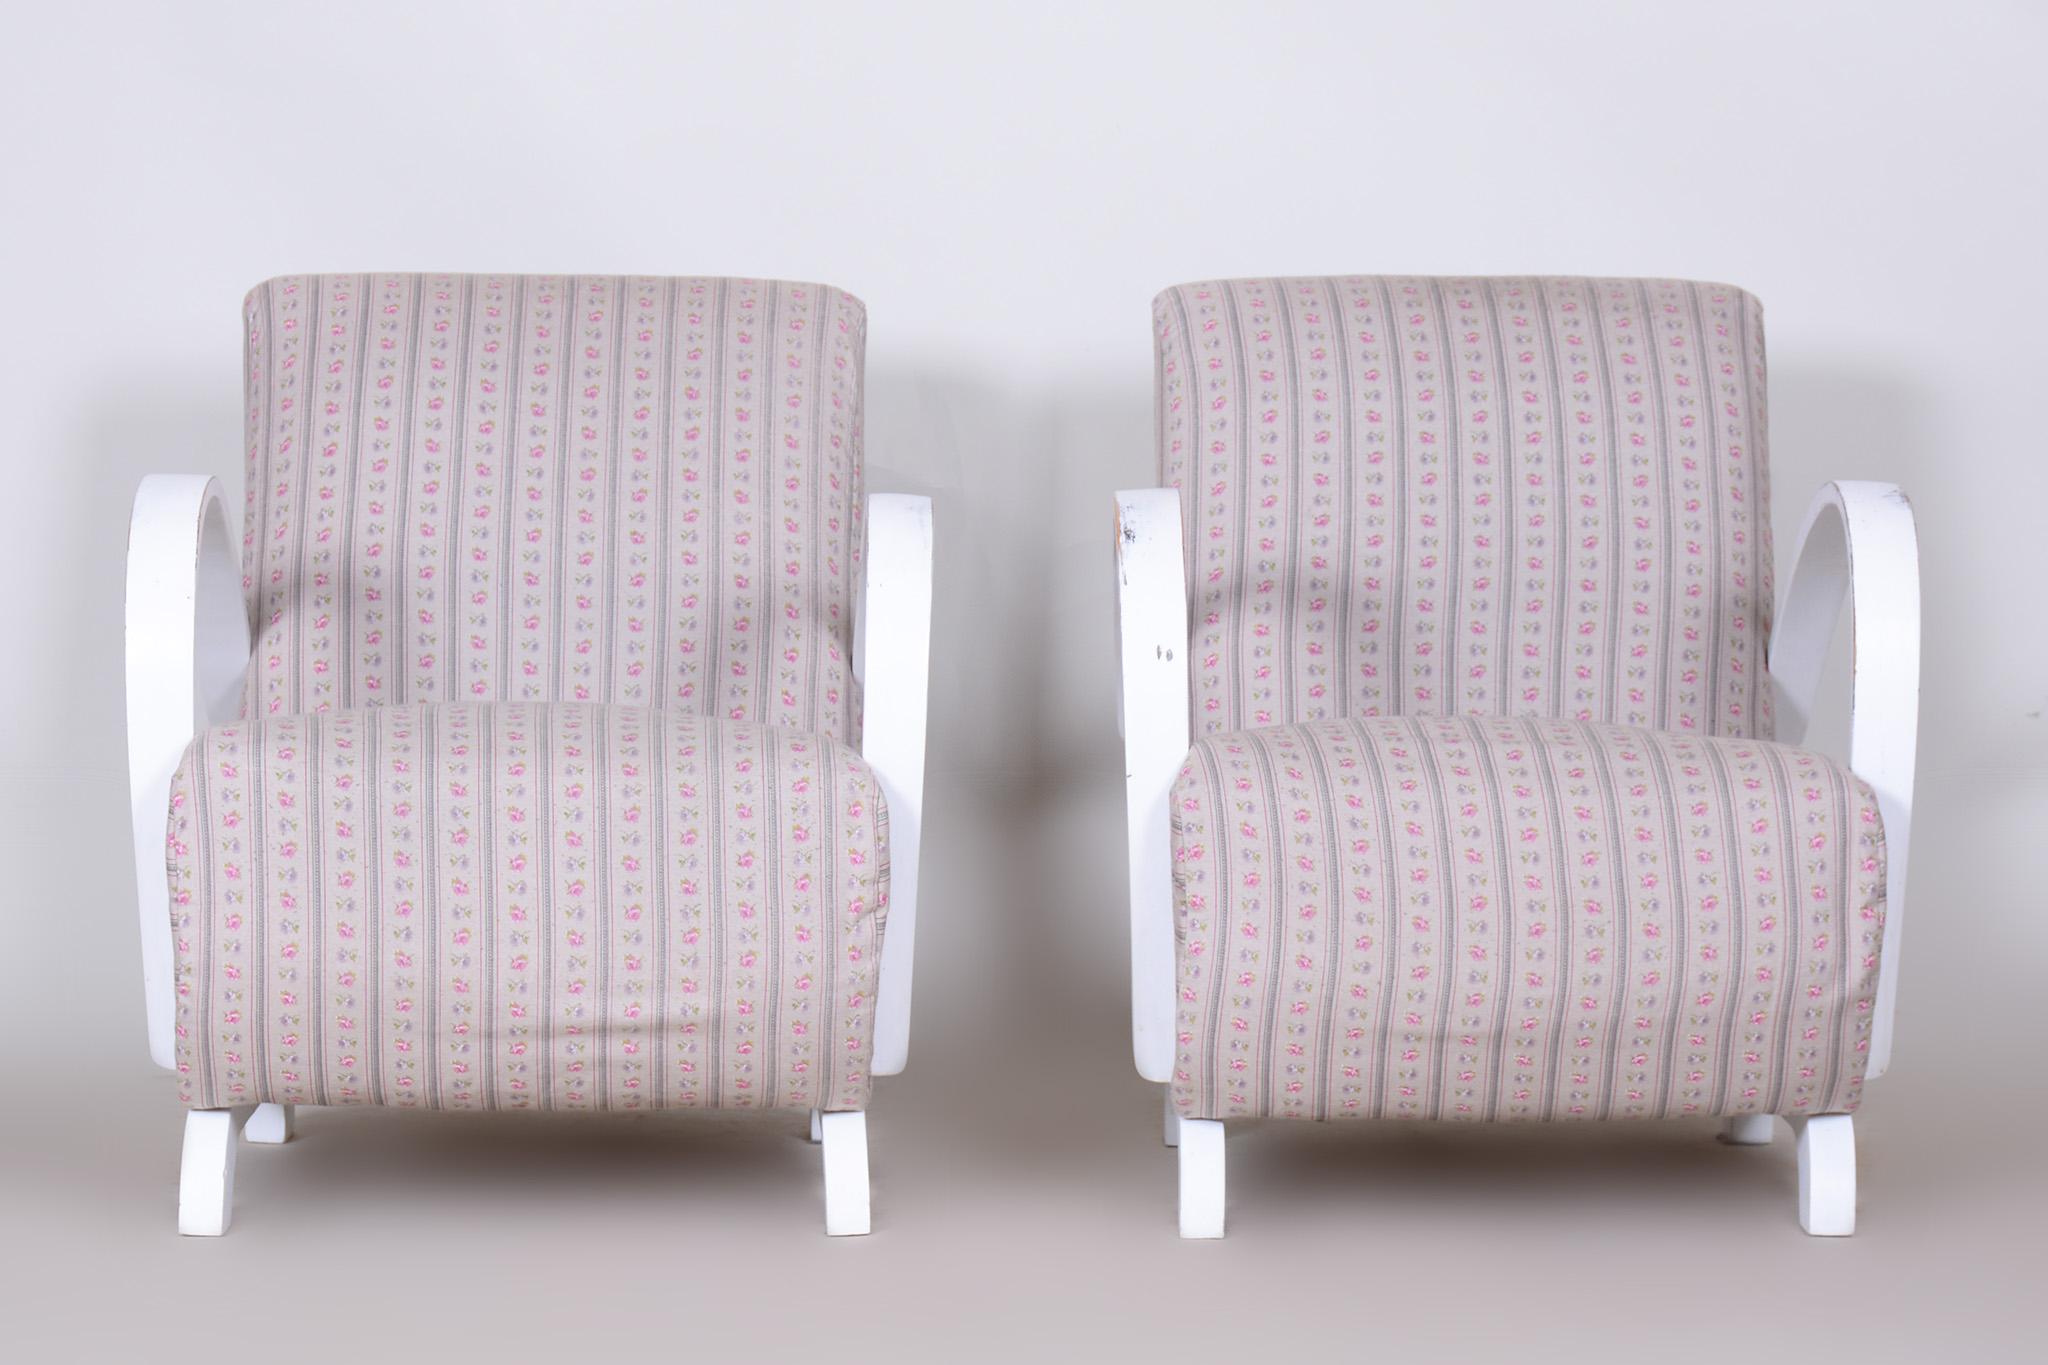 Original pair of white Art Deco beech armchairs.

Source: Czechia. 
Period: 1930-1939.
Material: Beech, Fabric.

Original preserved upholstery.
The fabric has been professionally cleaned.